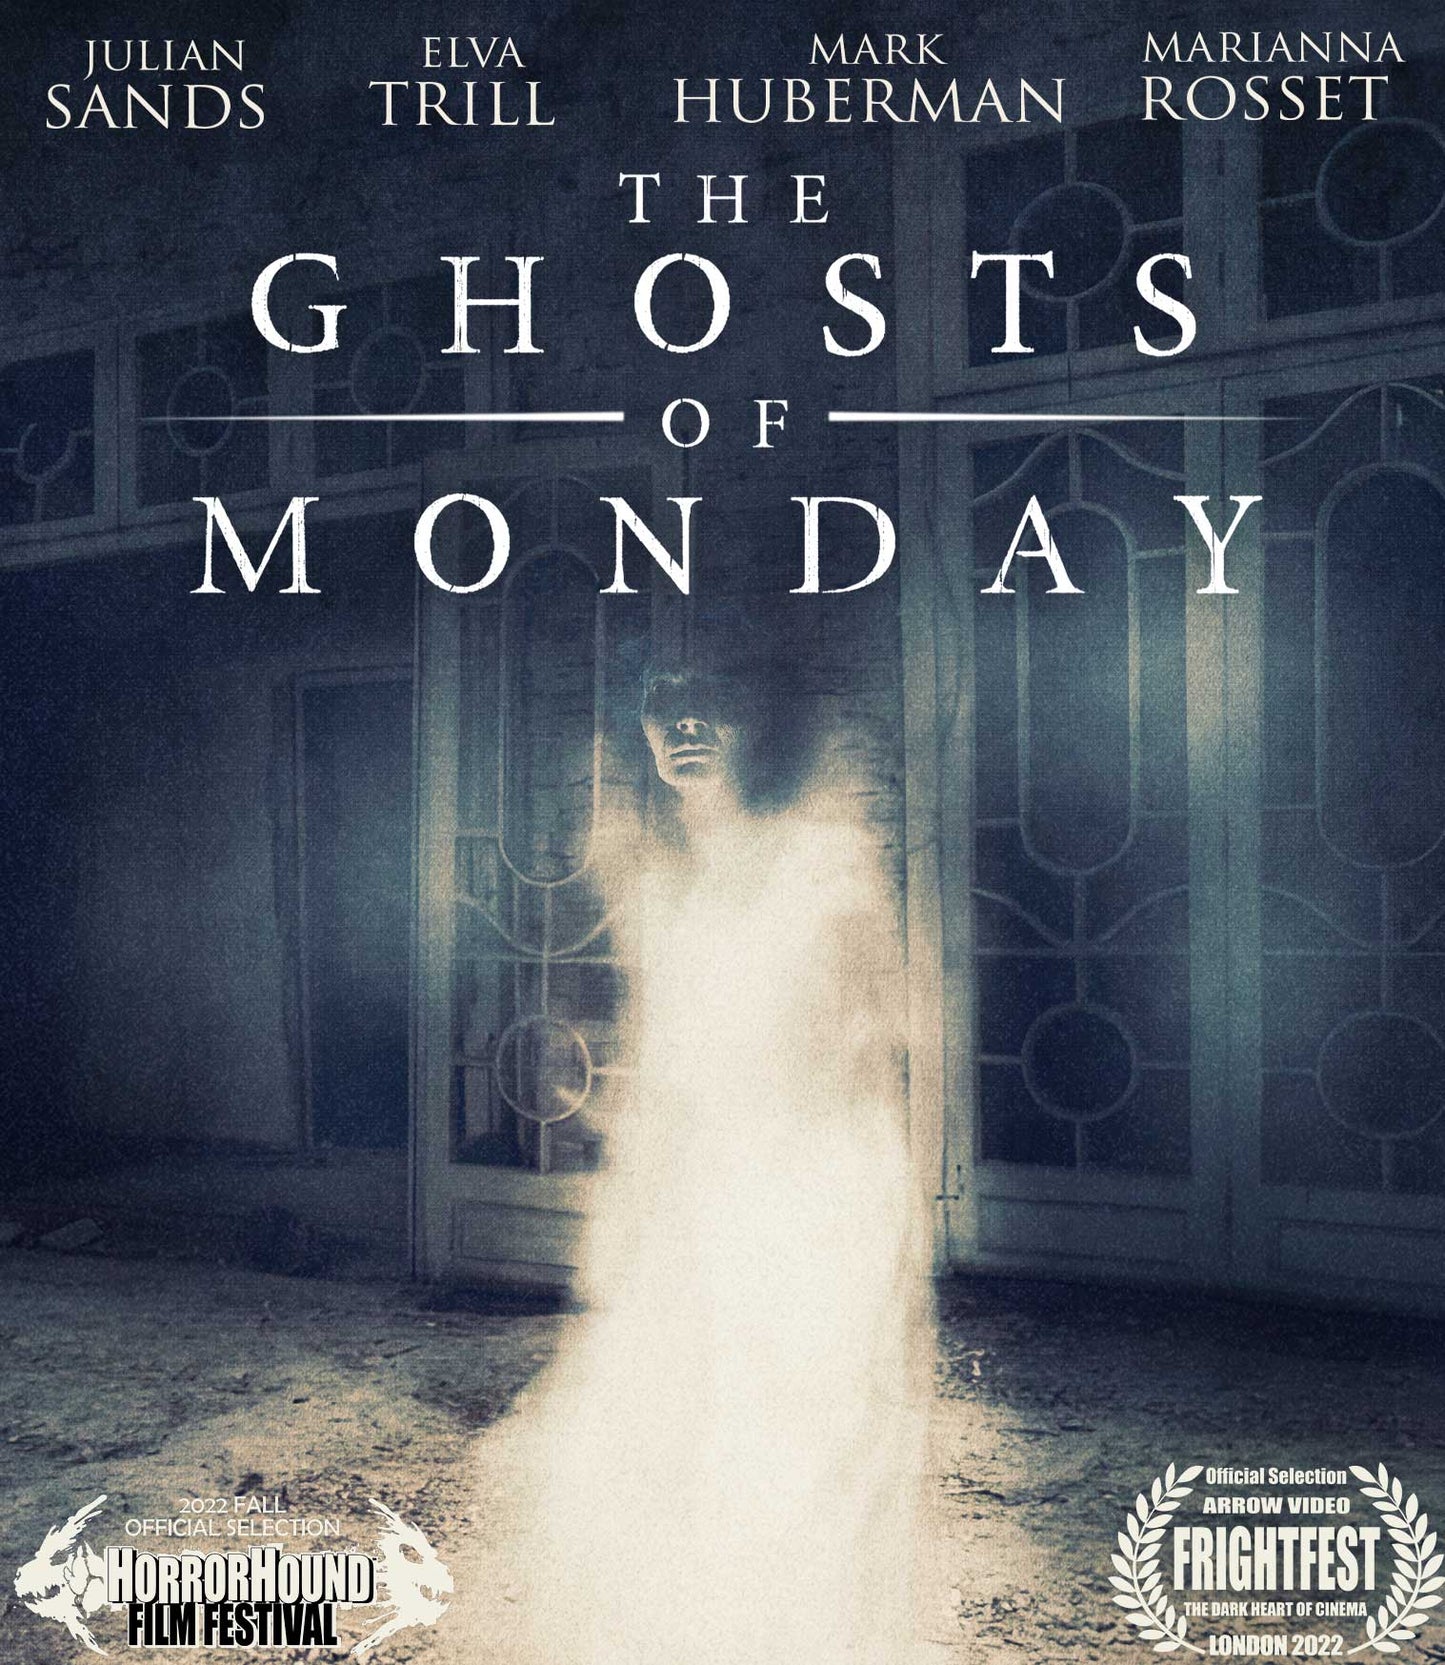 The Ghosts of Monday Blu-ray (U.S.)